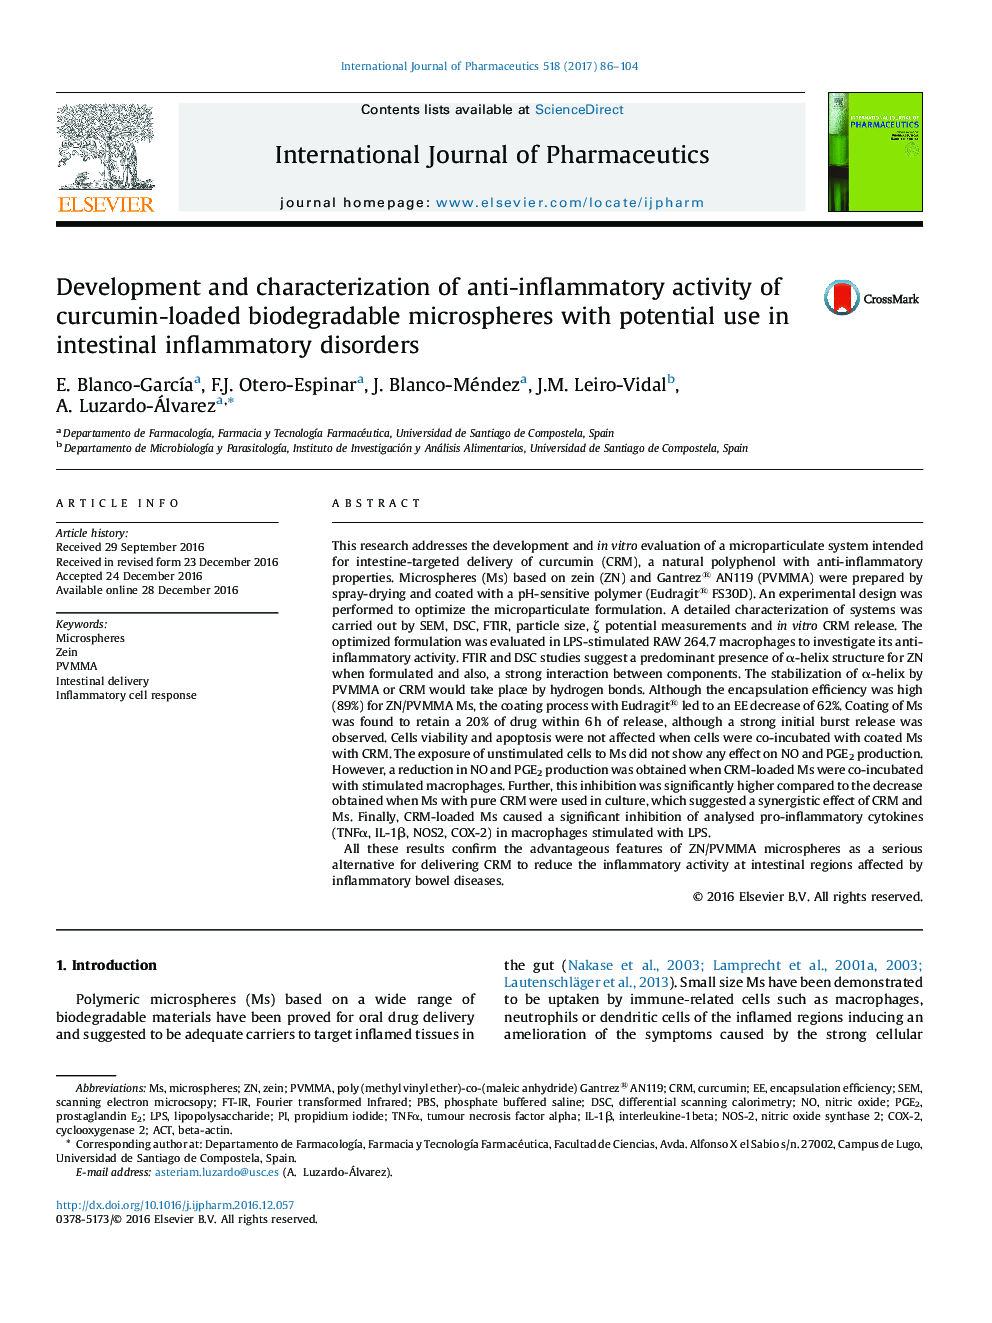 Development and characterization of anti-inflammatory activity of curcumin-loaded biodegradable microspheres with potential use in intestinal inflammatory disorders